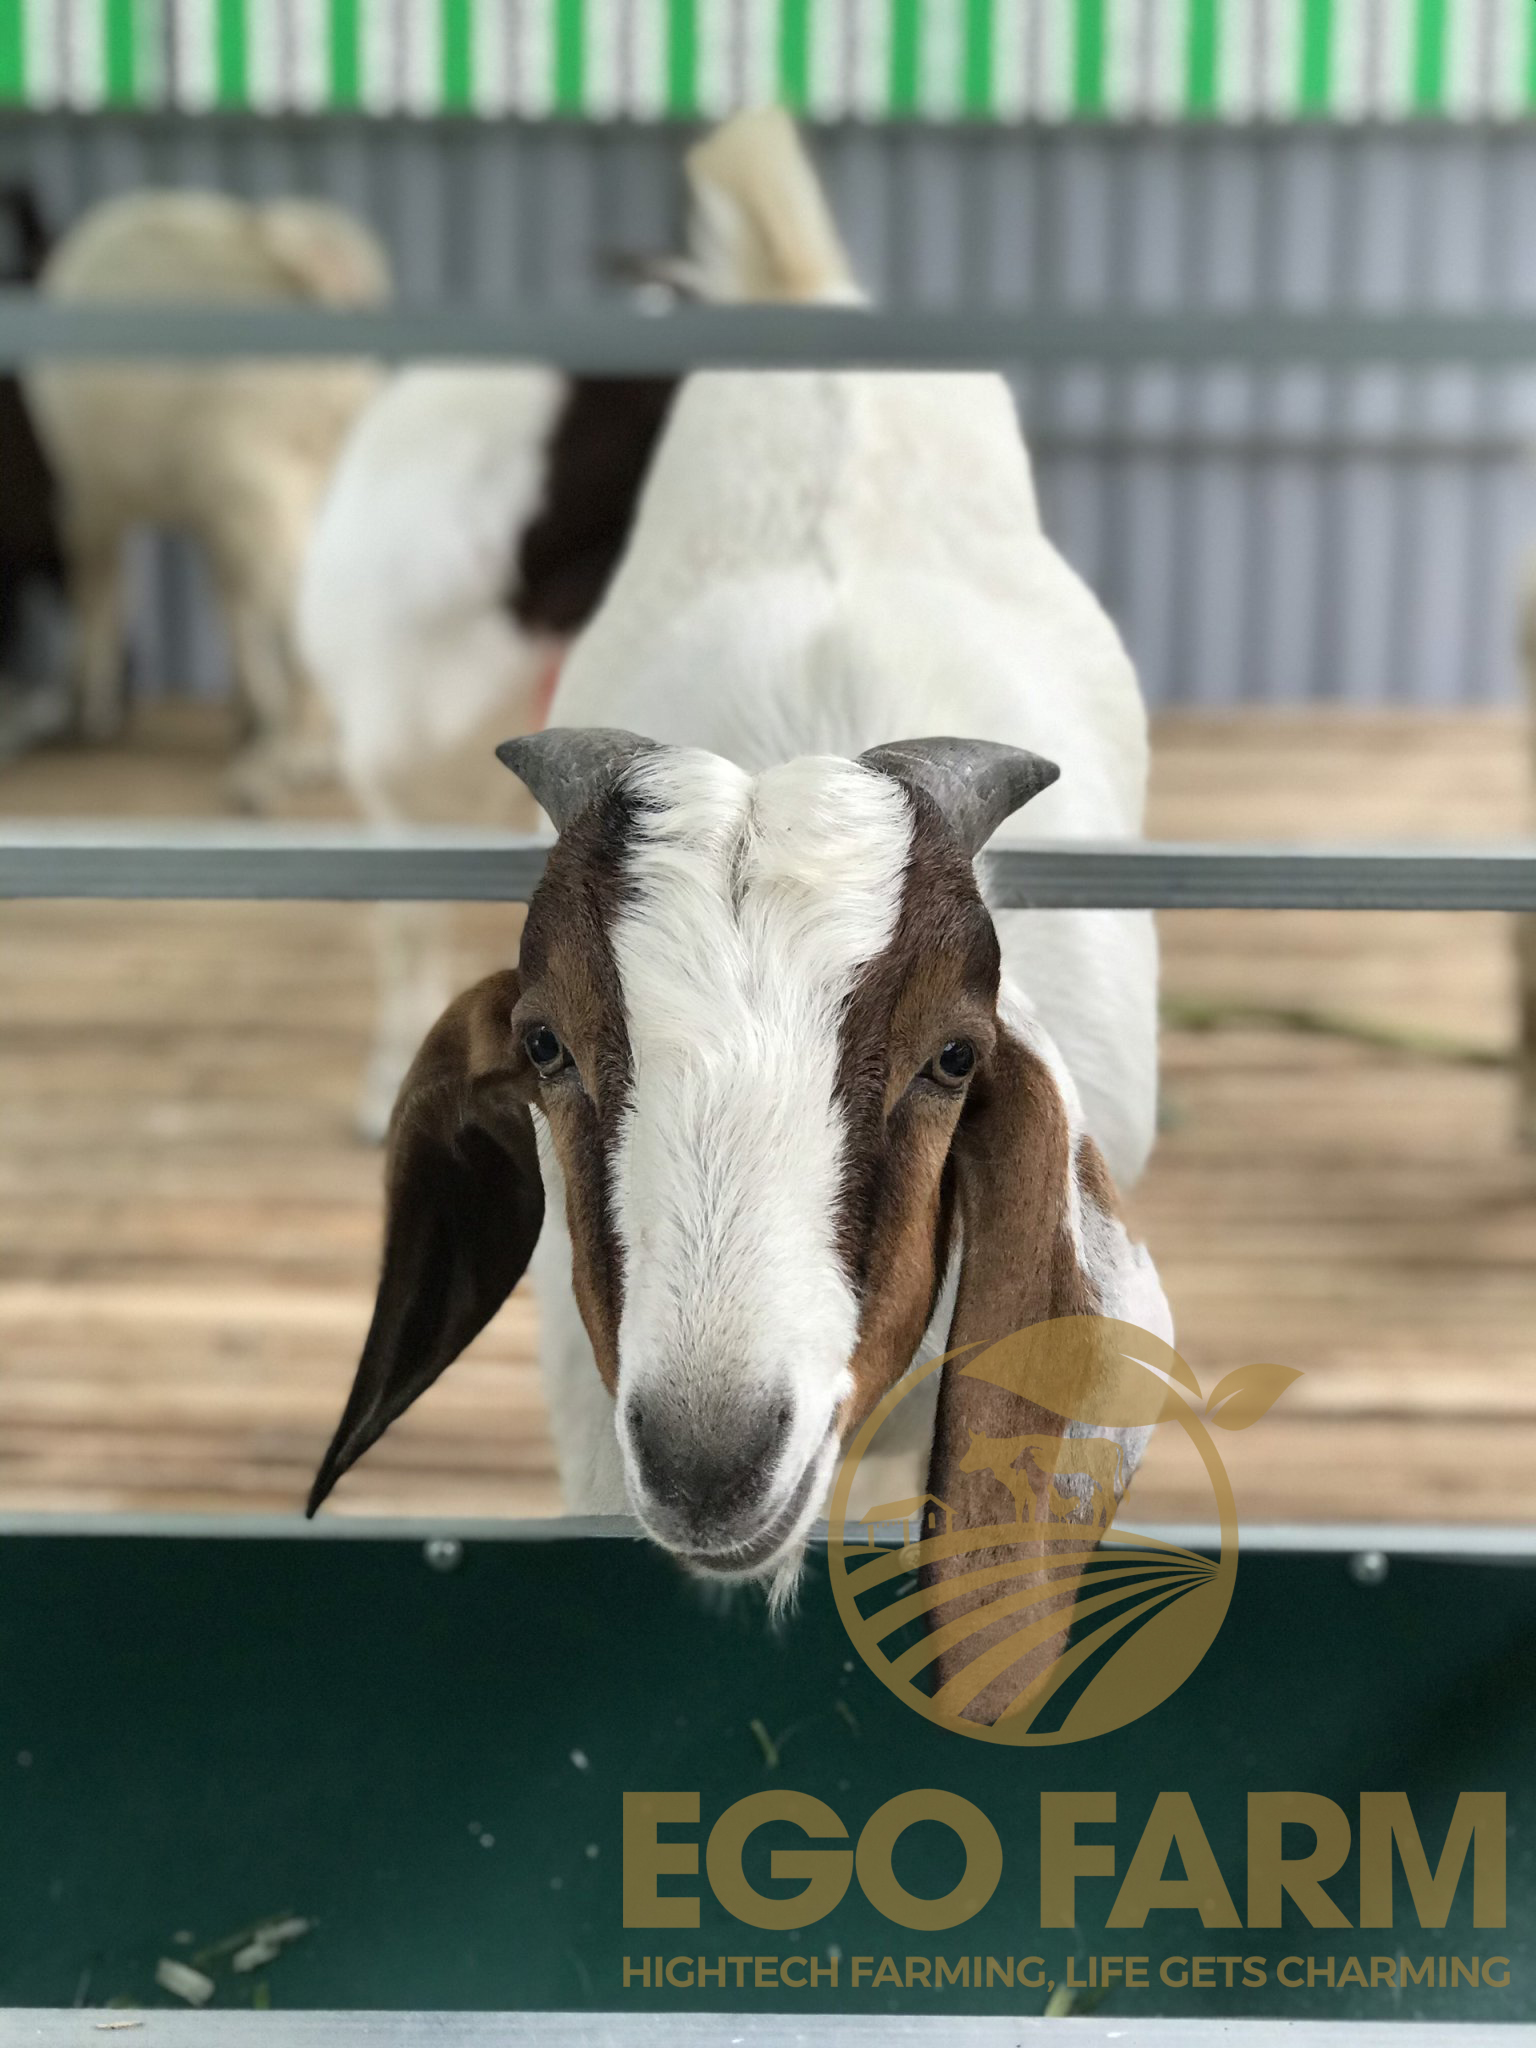 PREVENTTON AND TREATMENT OF FUNGAL SKIN DISEASES IN GOATS.